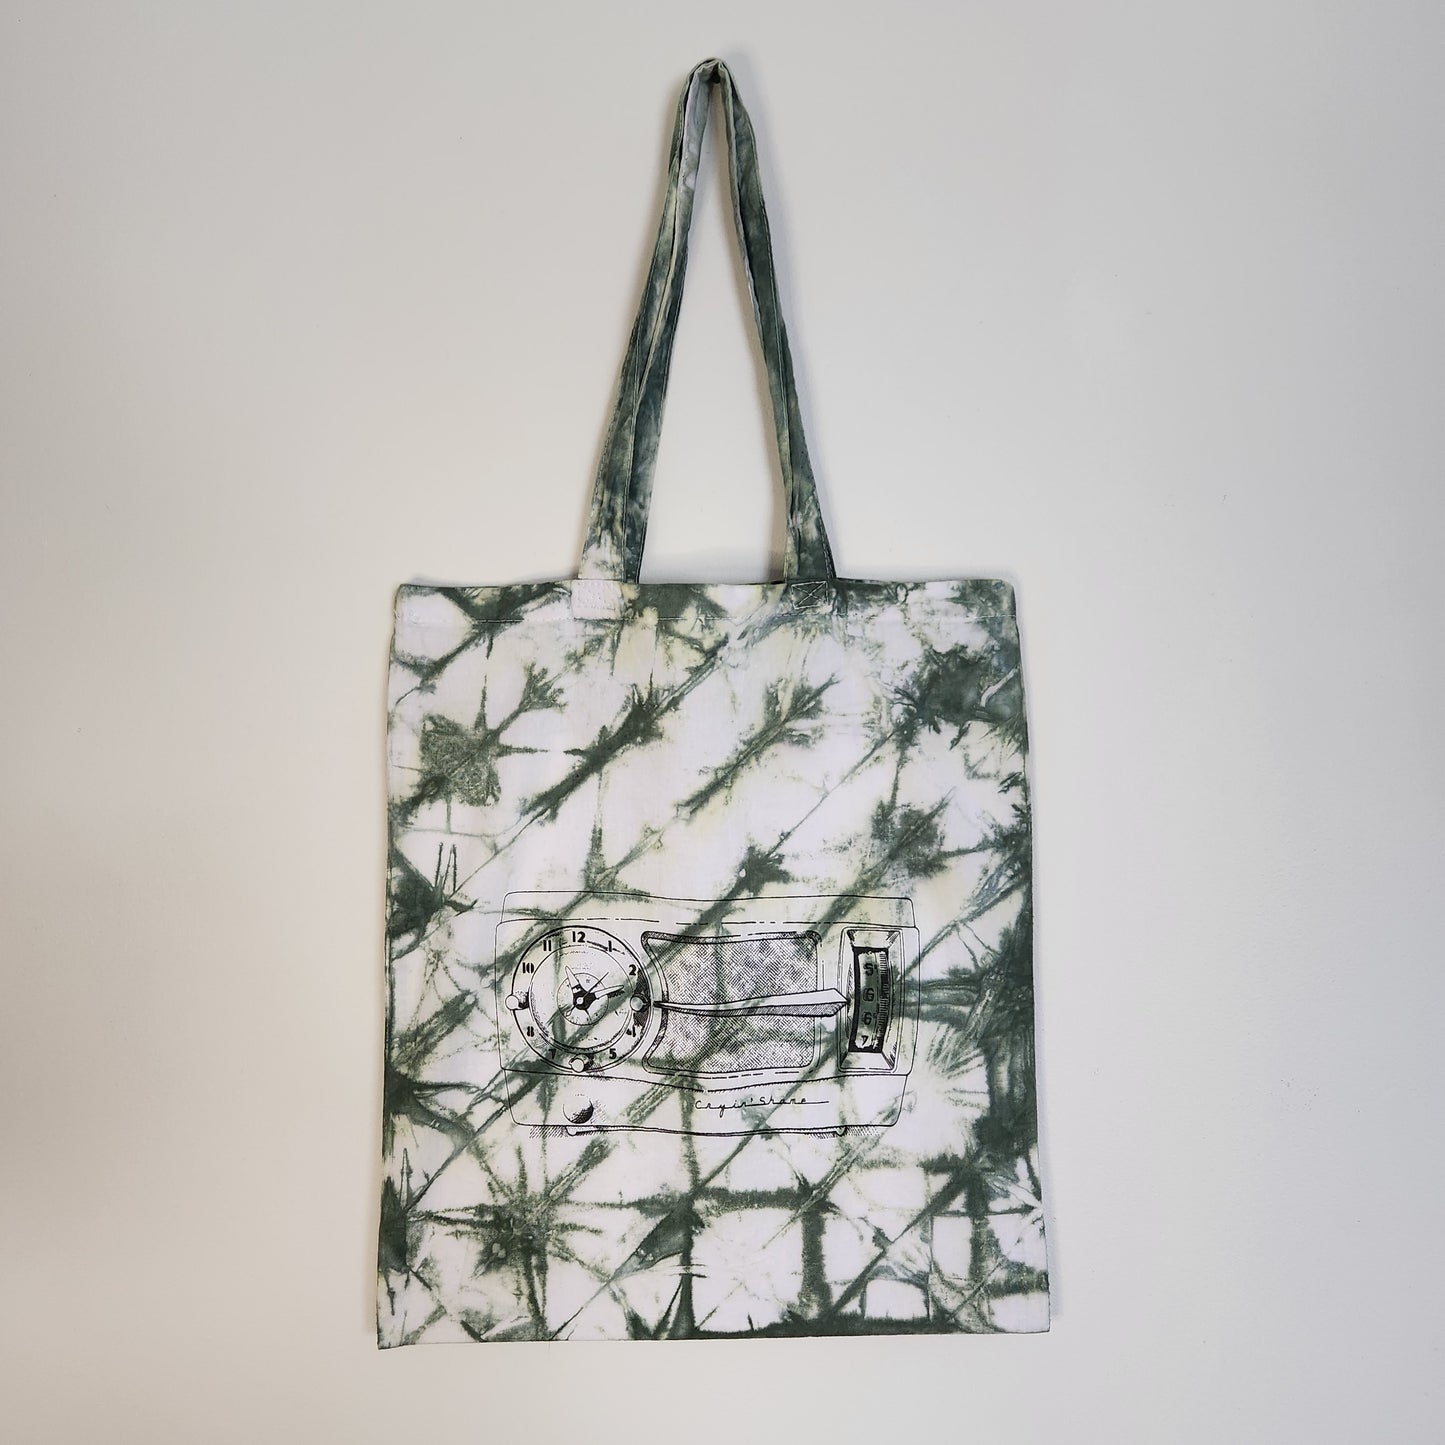 Tie Dye Totes - Limited Edition